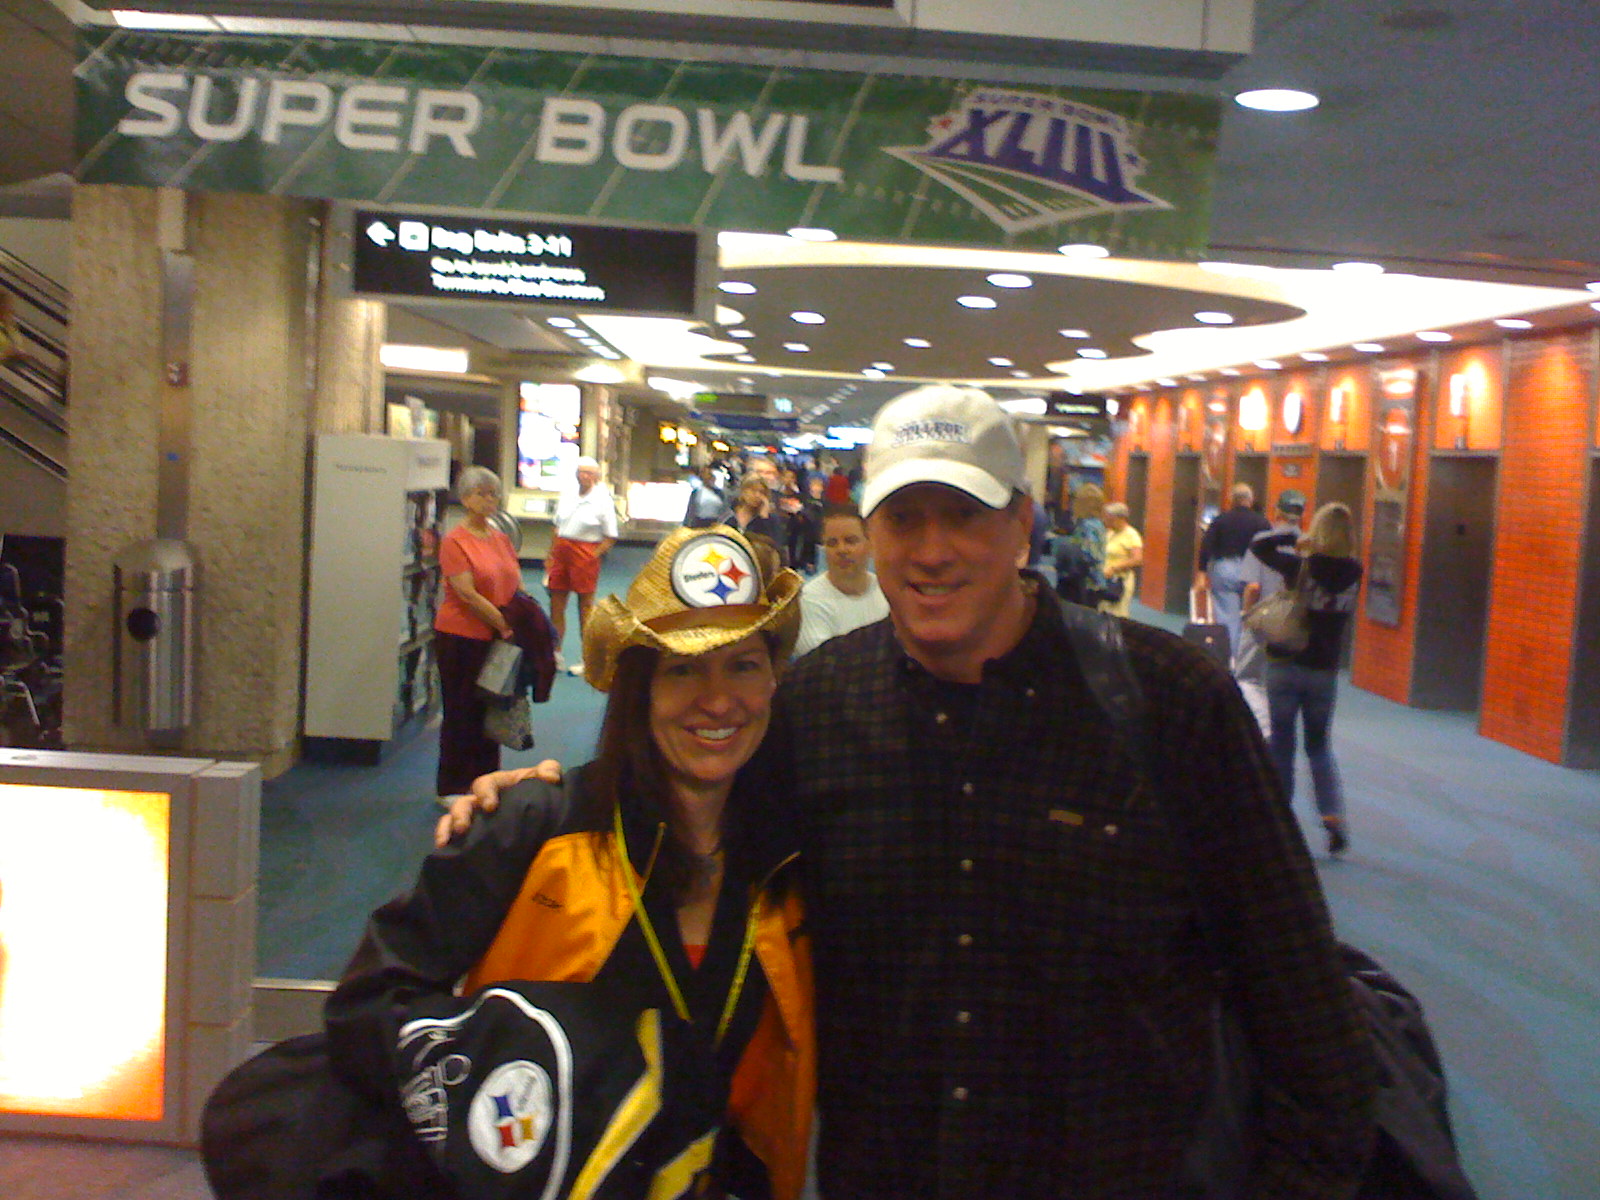 Trisha Simmons and NFL Hall of Fame Quarterback Jim Kelly on the way to cheer on the Steelers at The 43rd Super Bowl inTampa Bay.